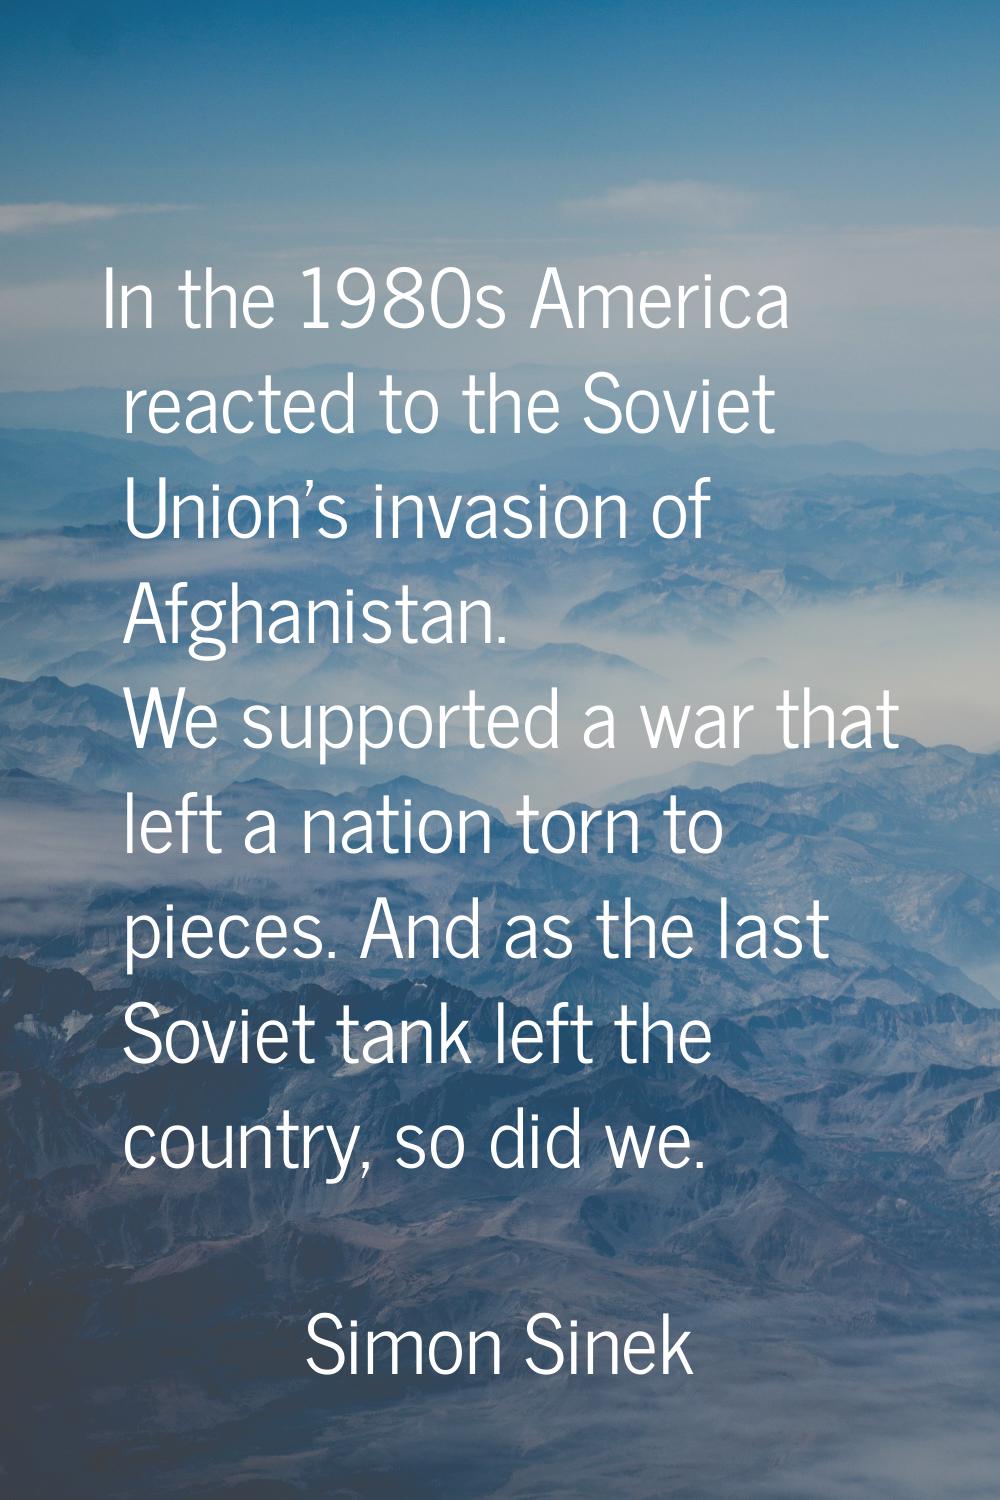 In the 1980s America reacted to the Soviet Union's invasion of Afghanistan. We supported a war that